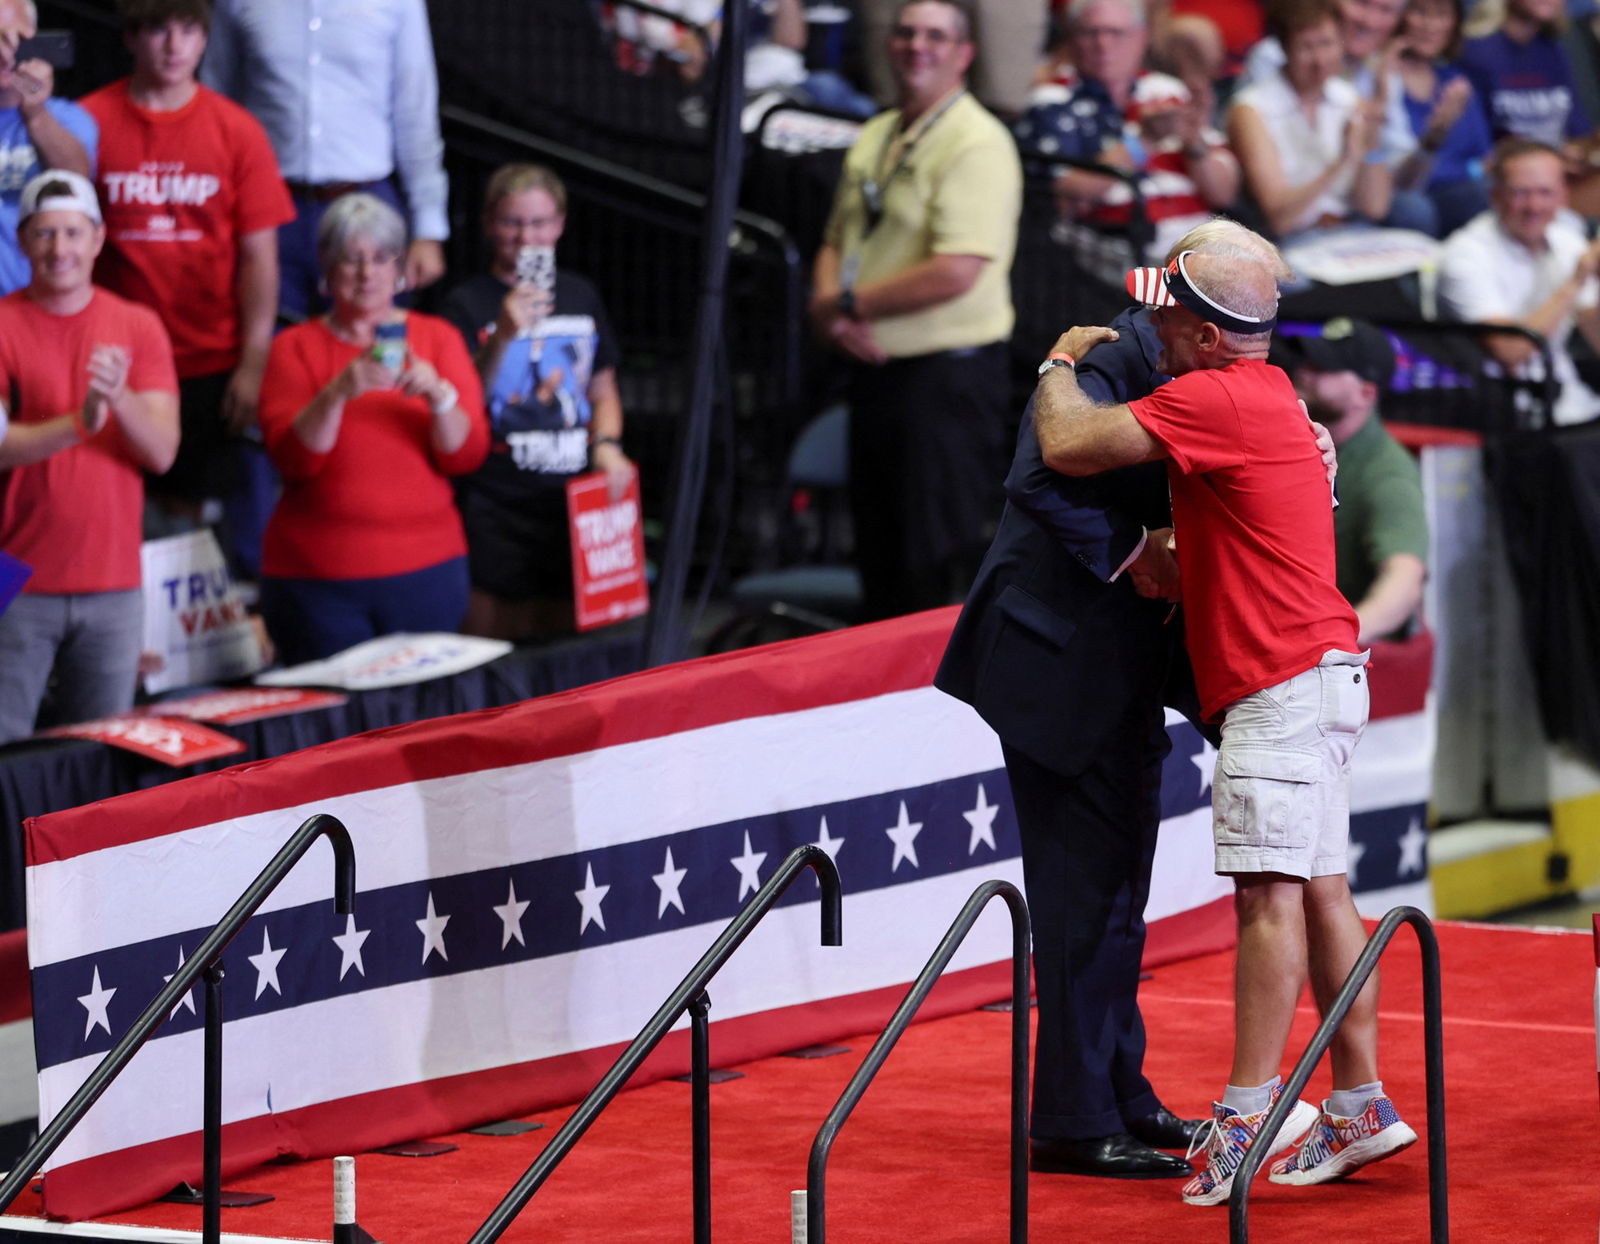 Donald Trump embraces a supporter on stage